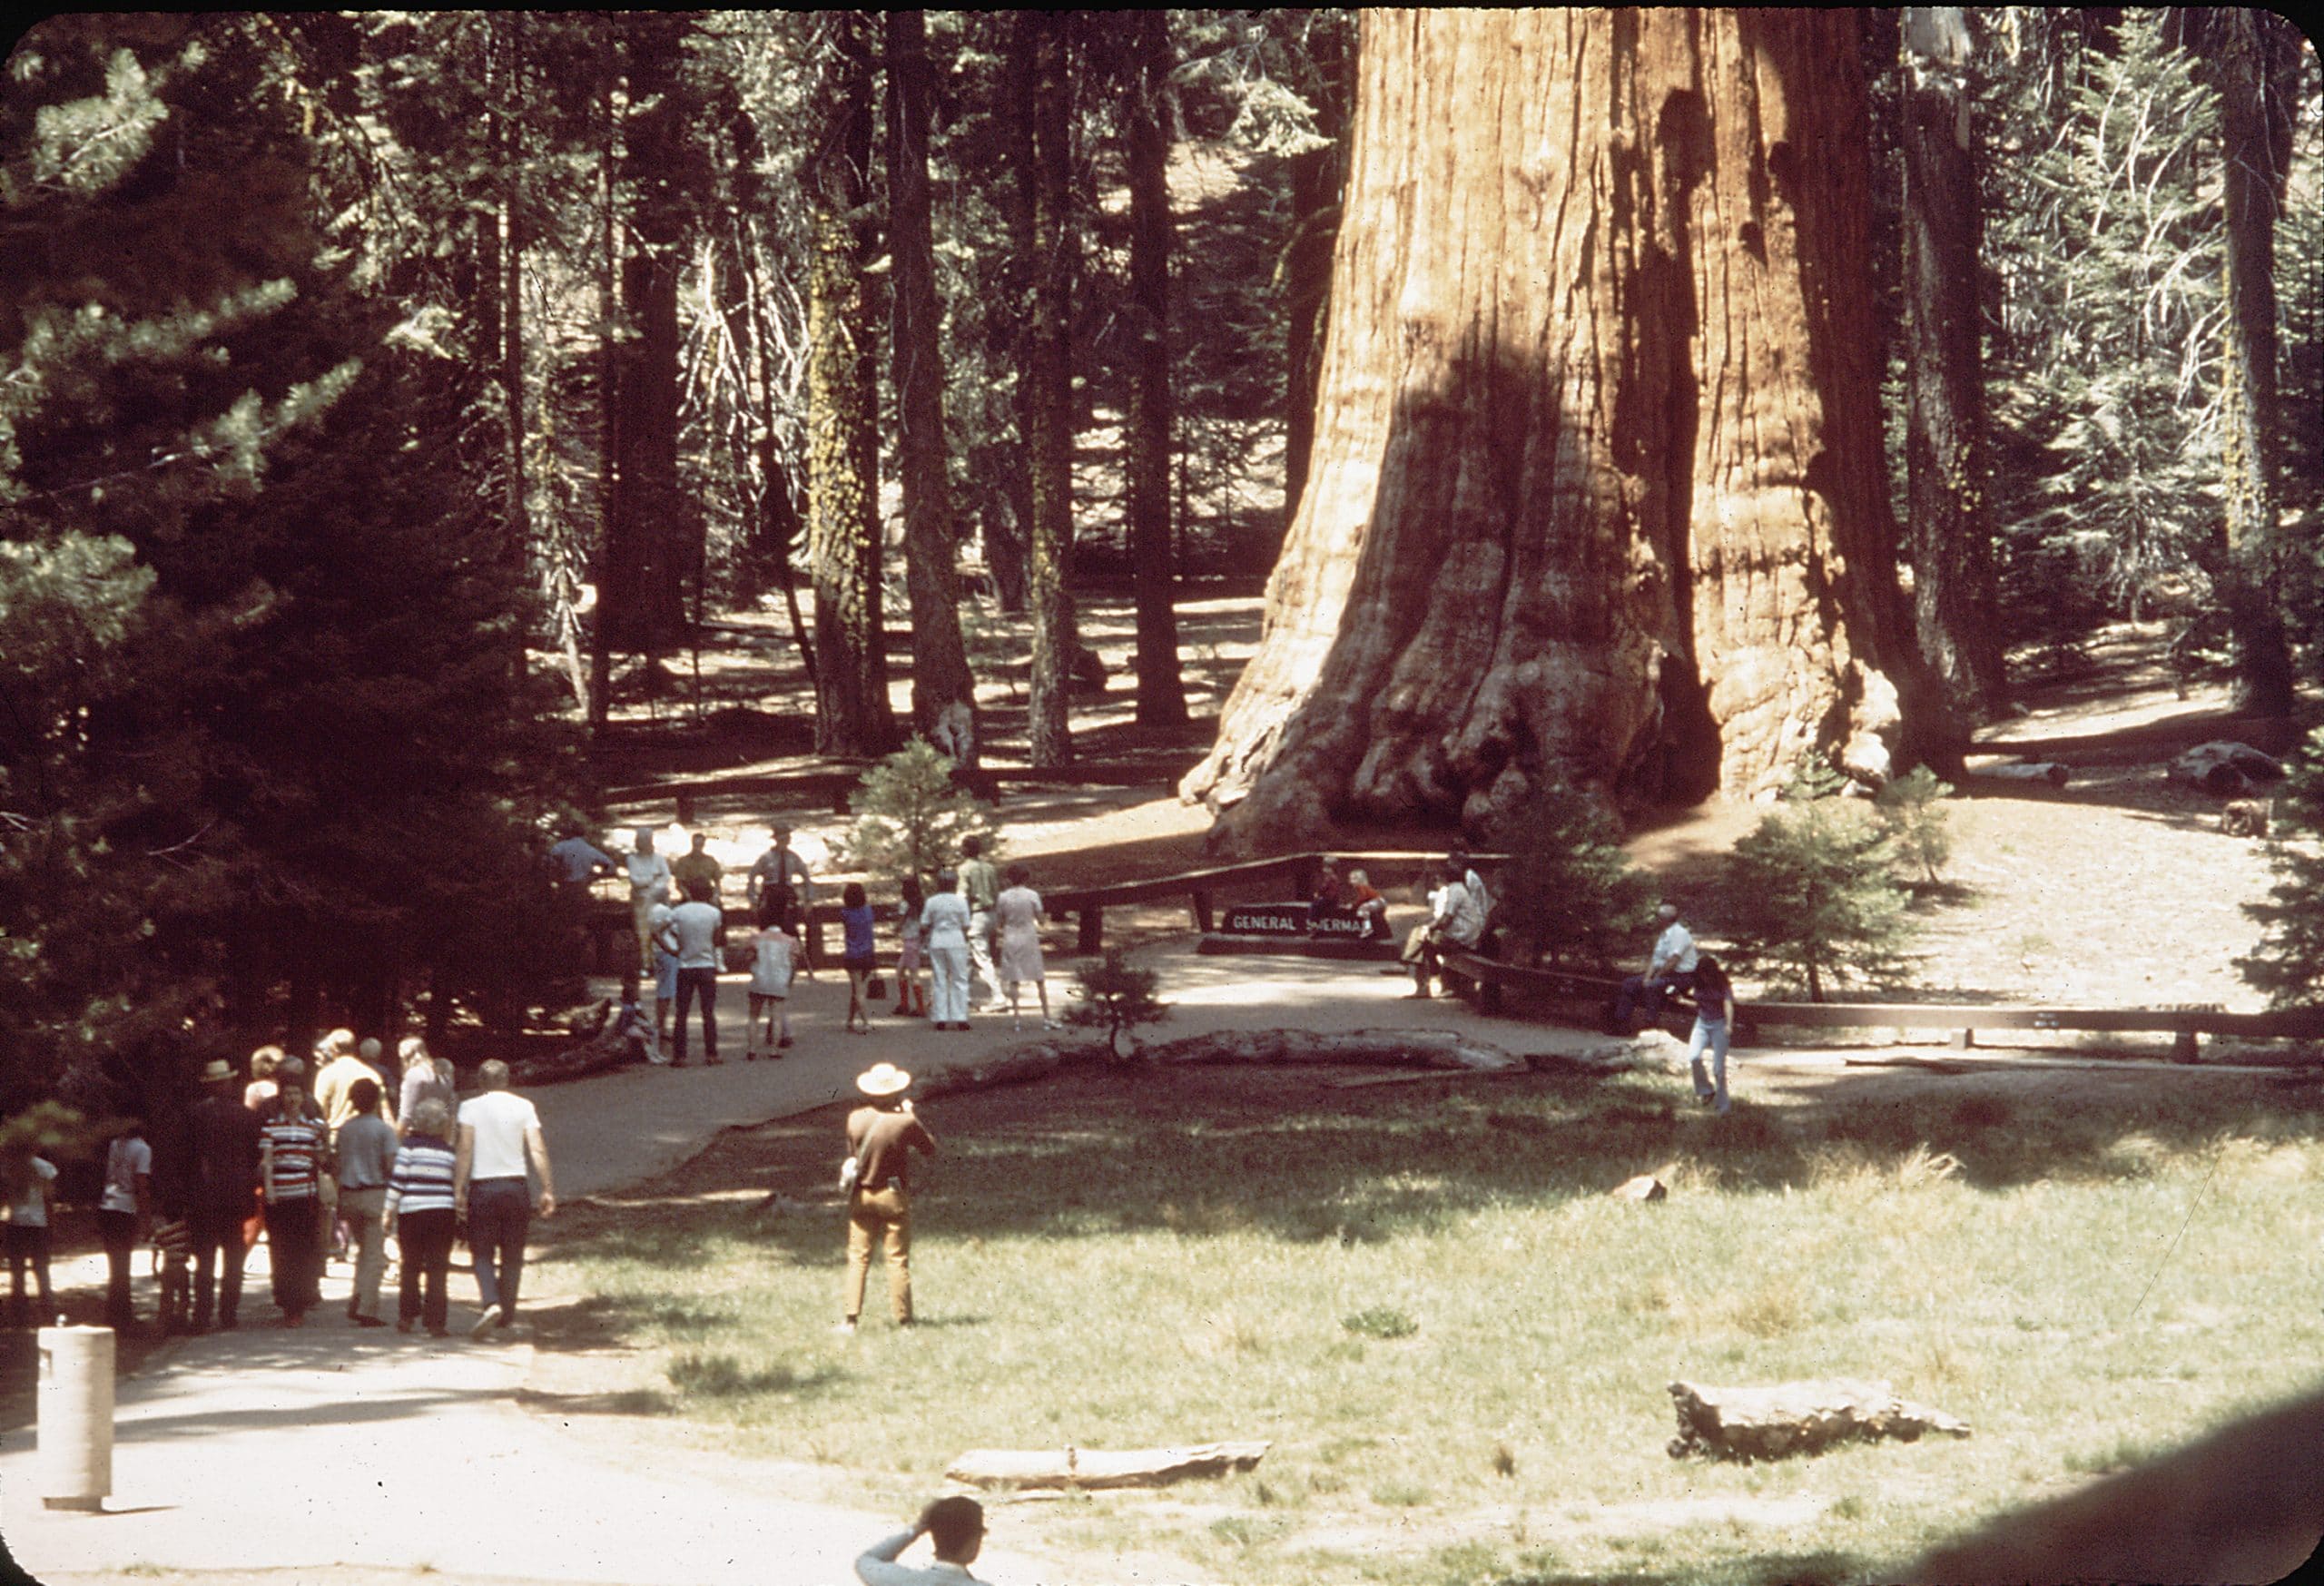 Crowds visiting the world's largest tree | National Parks Facts